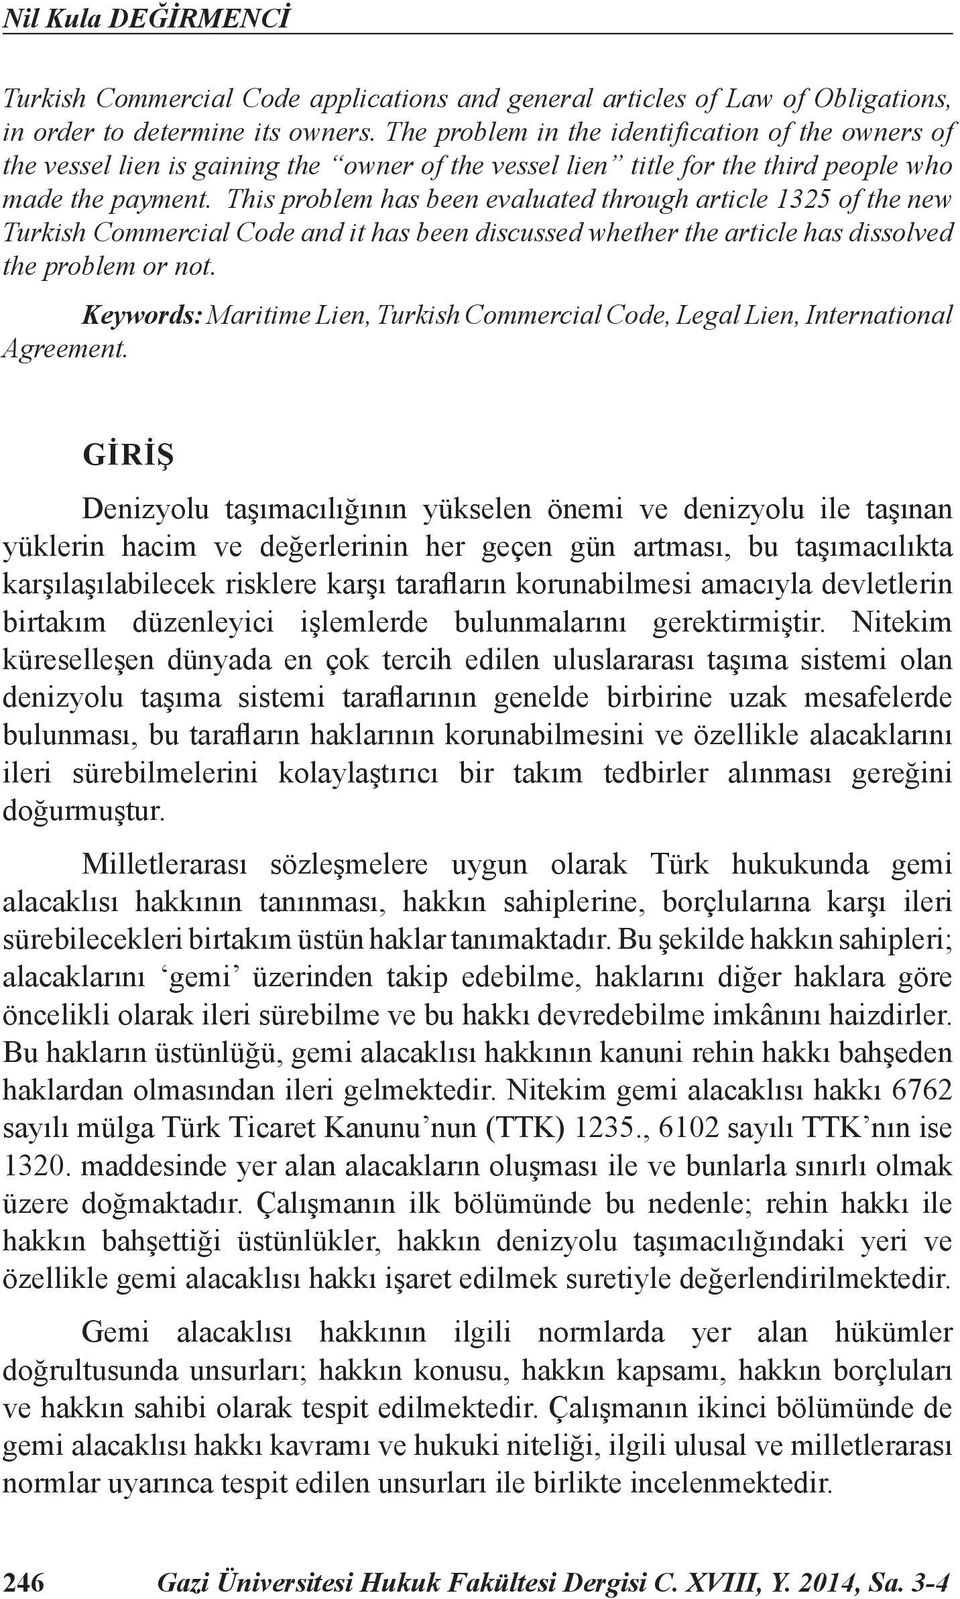 This problem has been evaluated through article 1325 of the new Turkish Commercial Code and it has been discussed whether the article has dissolved the problem or not.